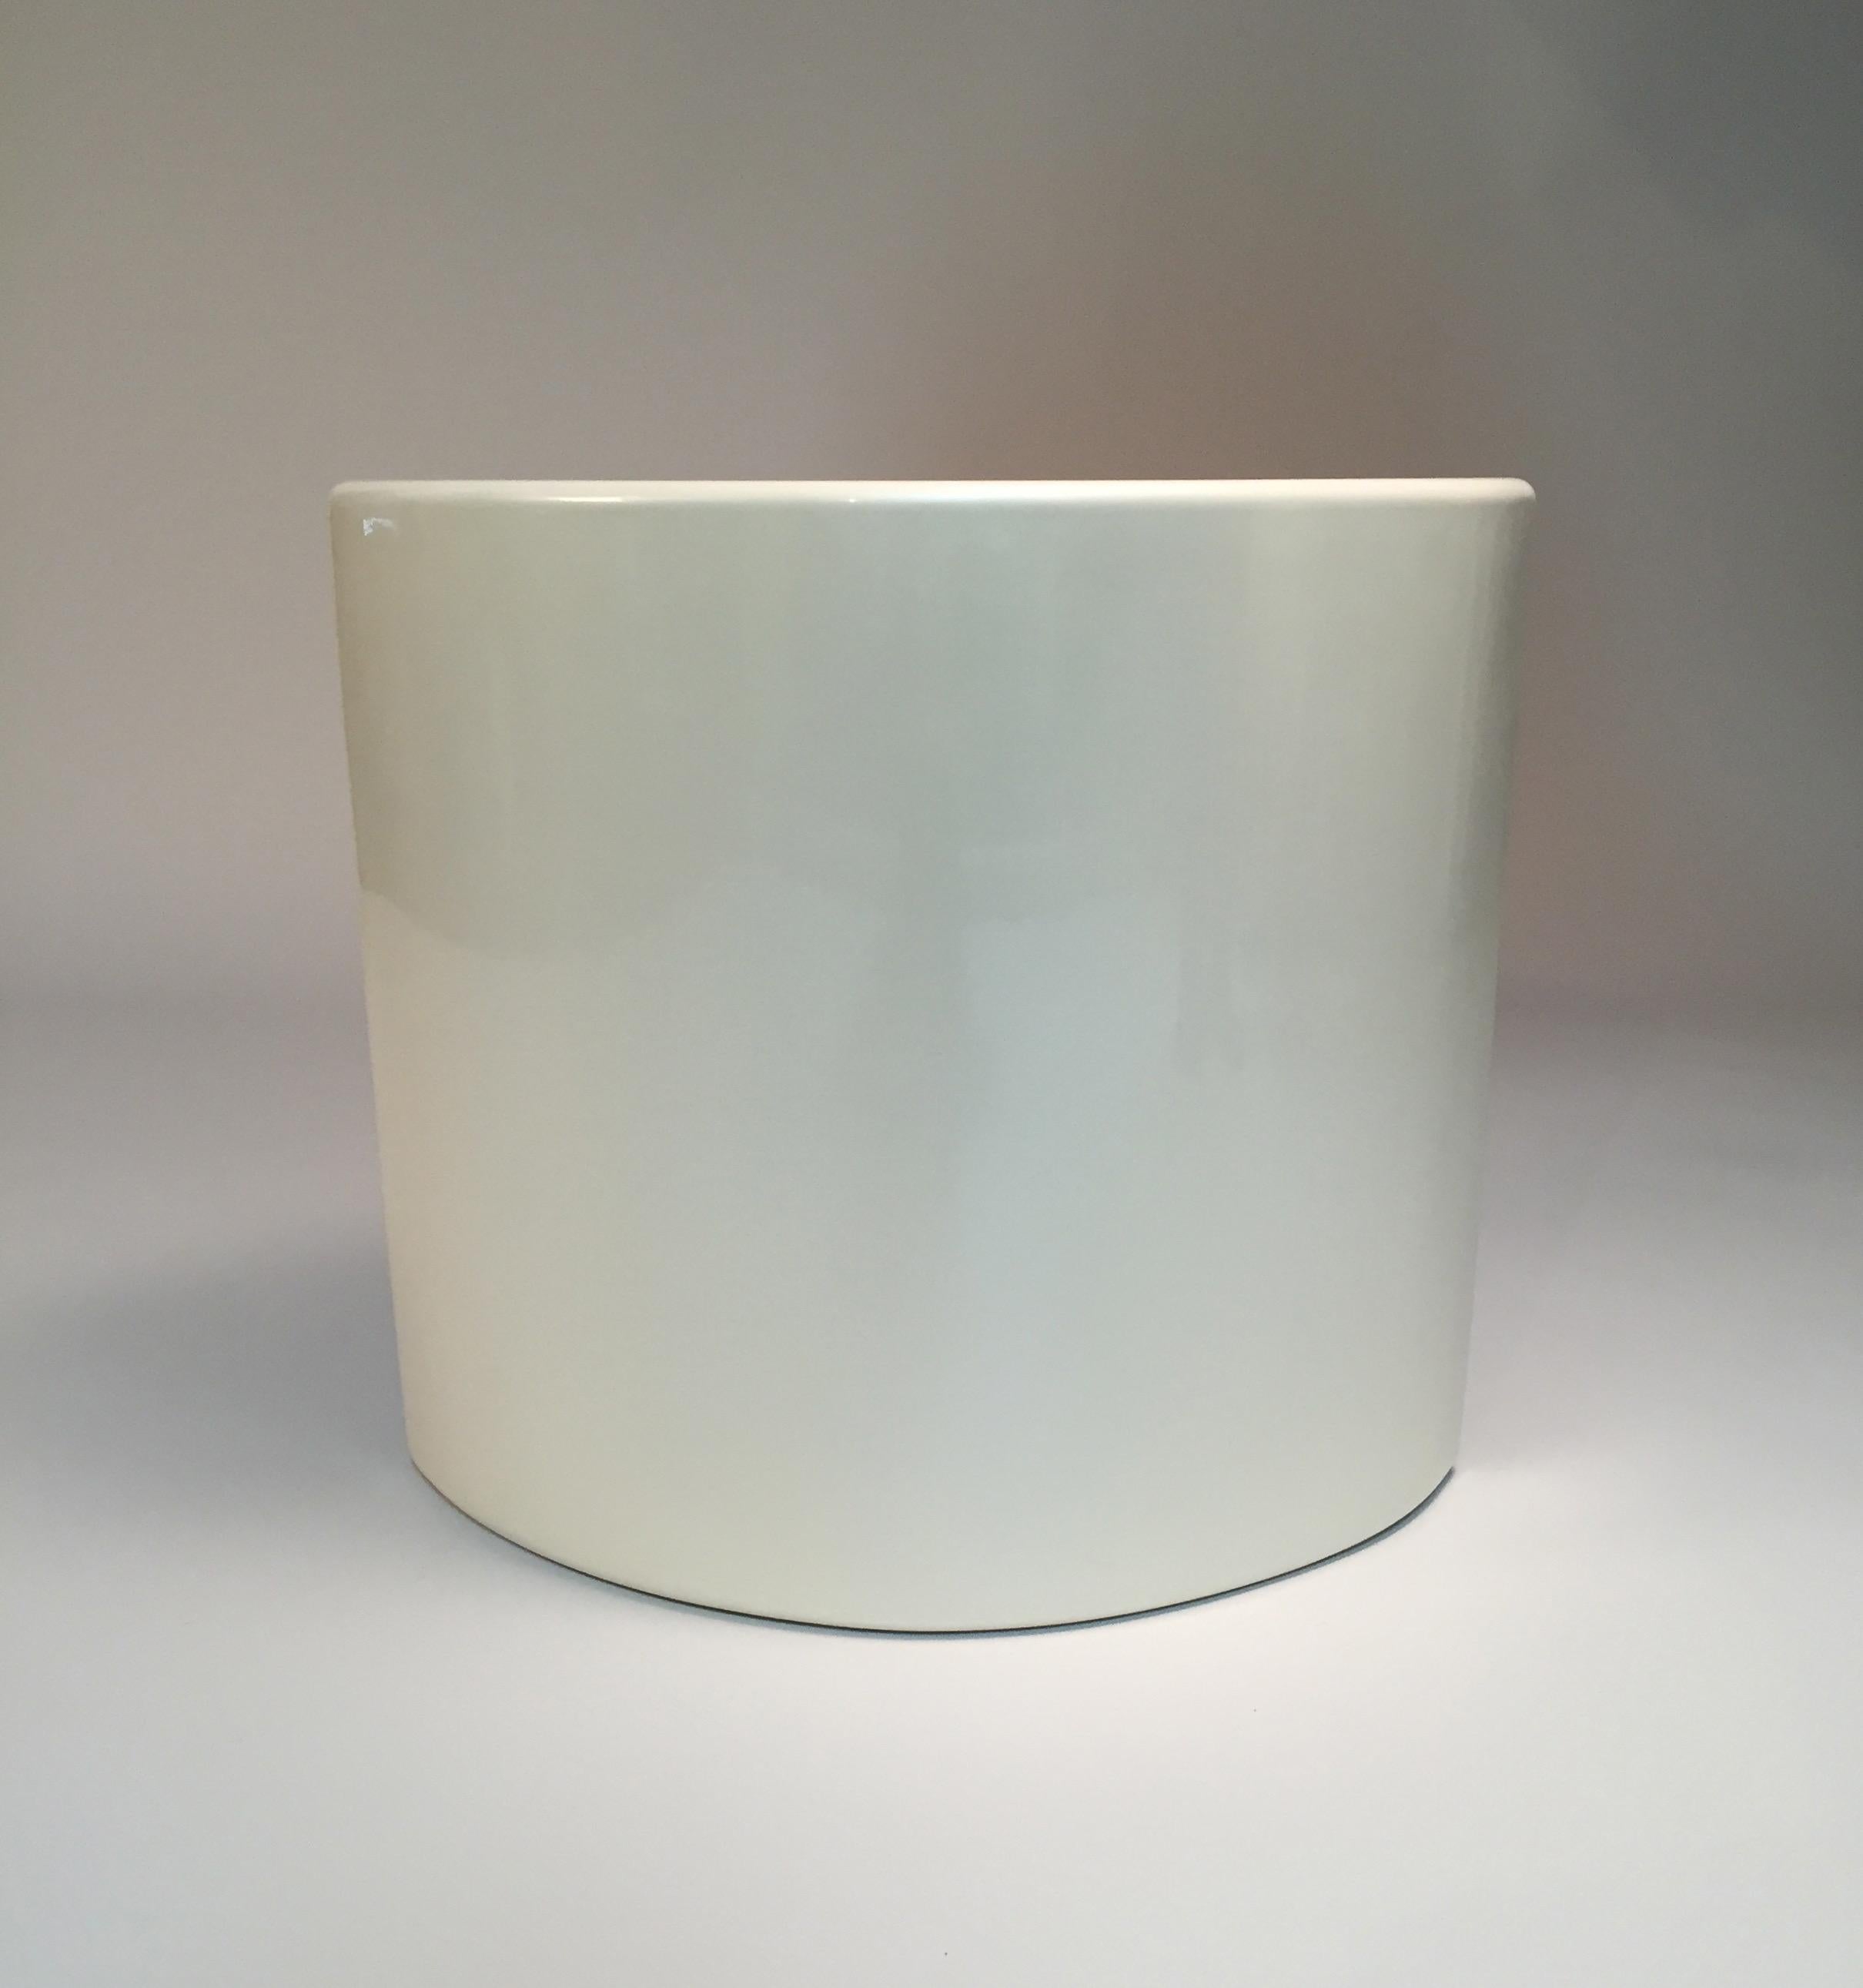 Lacquered White Lacquer Pearlescent Gloss Side Table or Seat For Sale